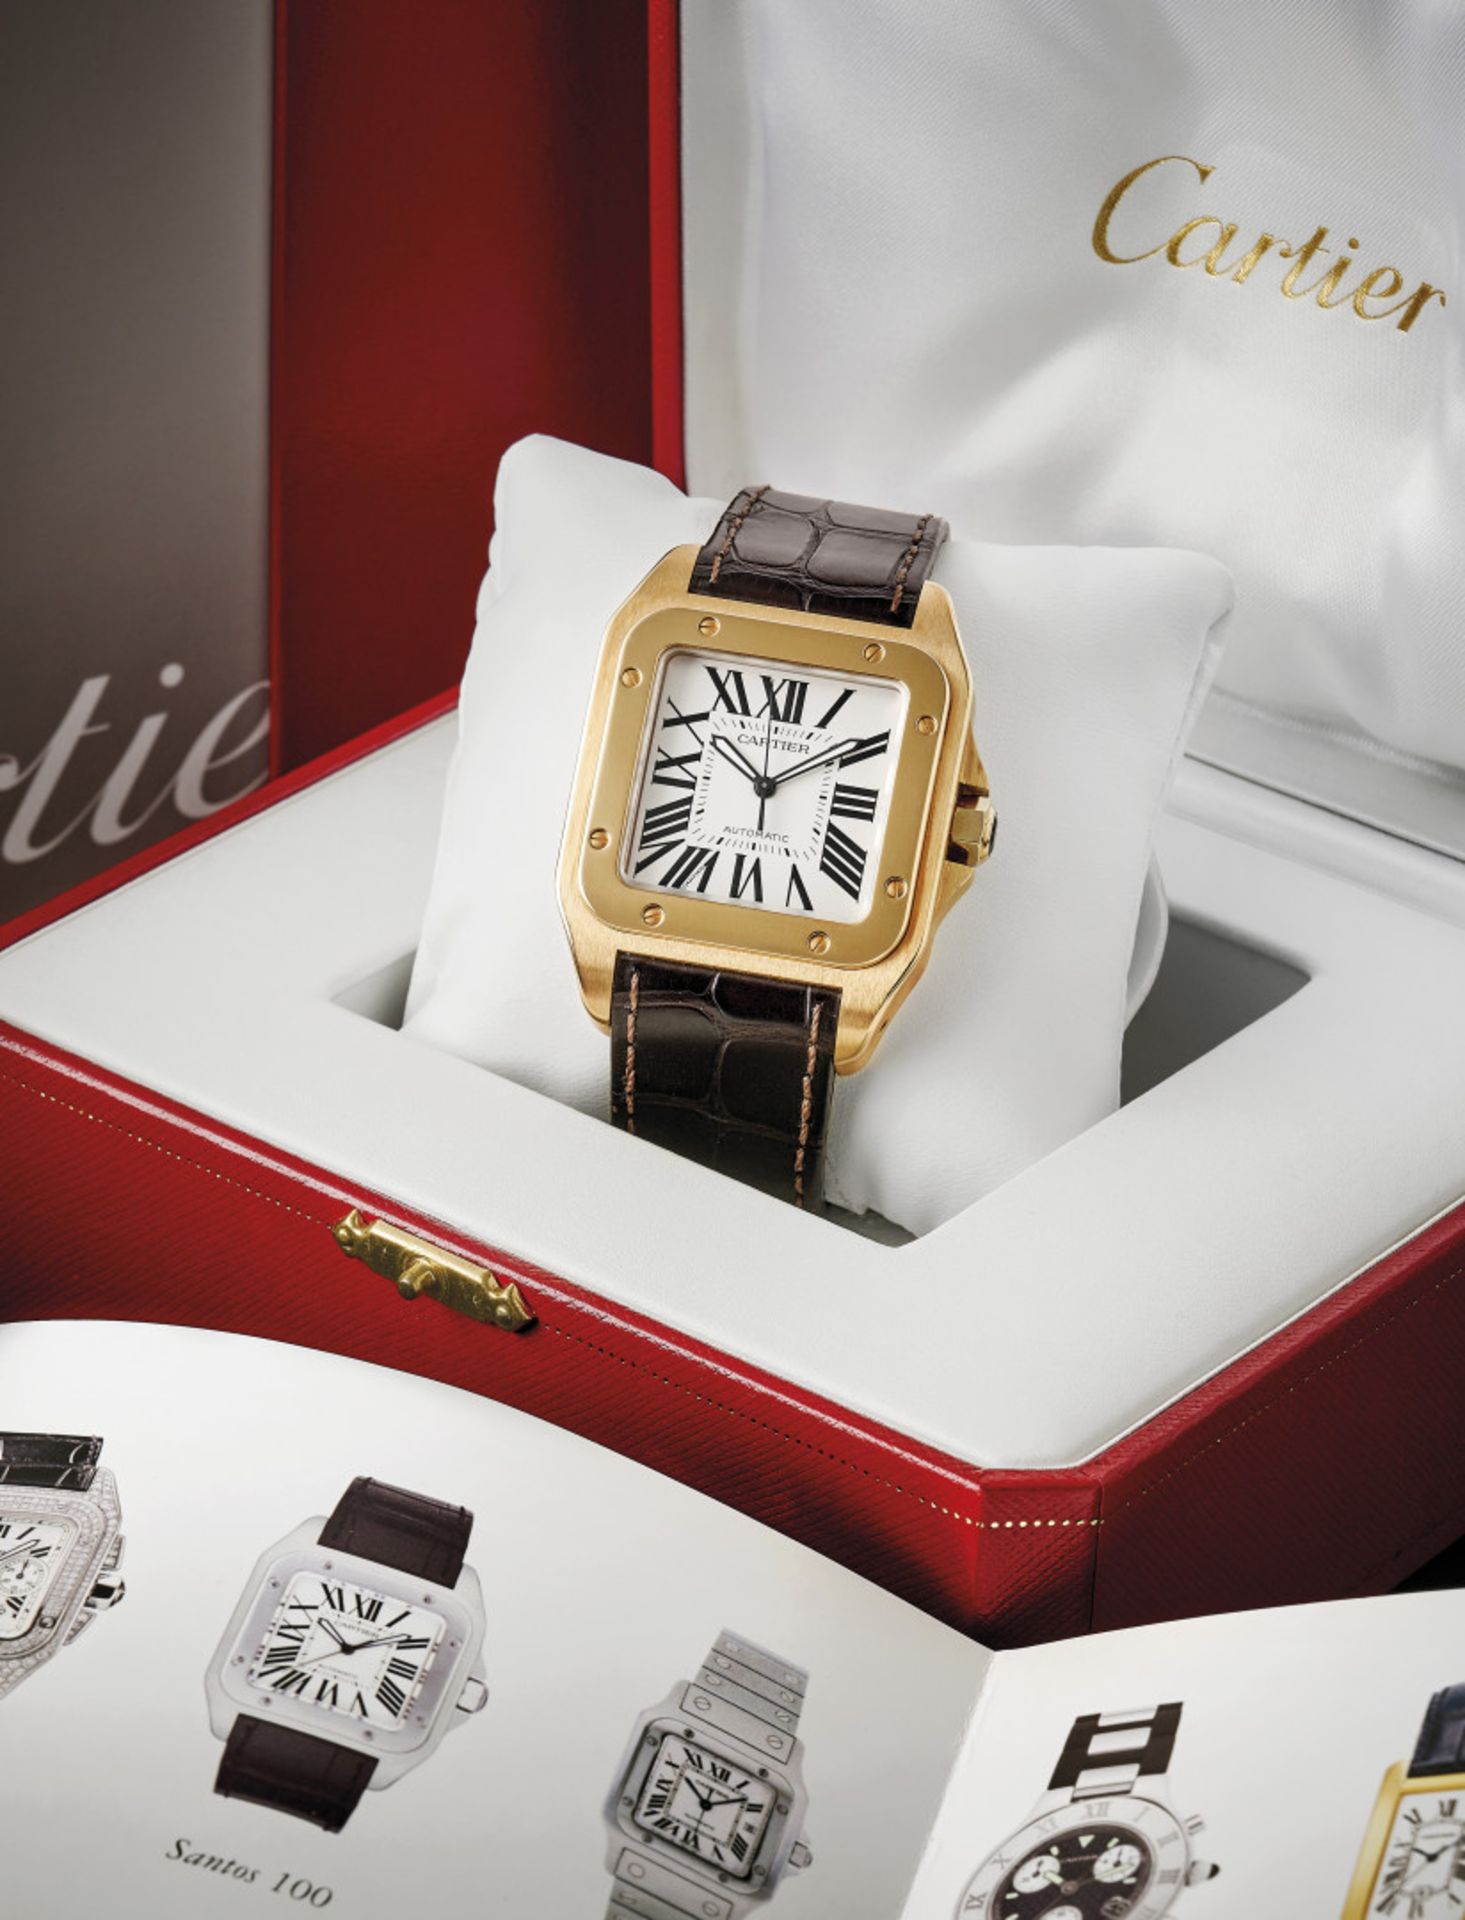 CARTIER SANTOS 100 XL REF. 2792 IN ROSE GOLD WITH BOX AND PAPERS, SOLD IN 2007 - Bild 2 aus 2